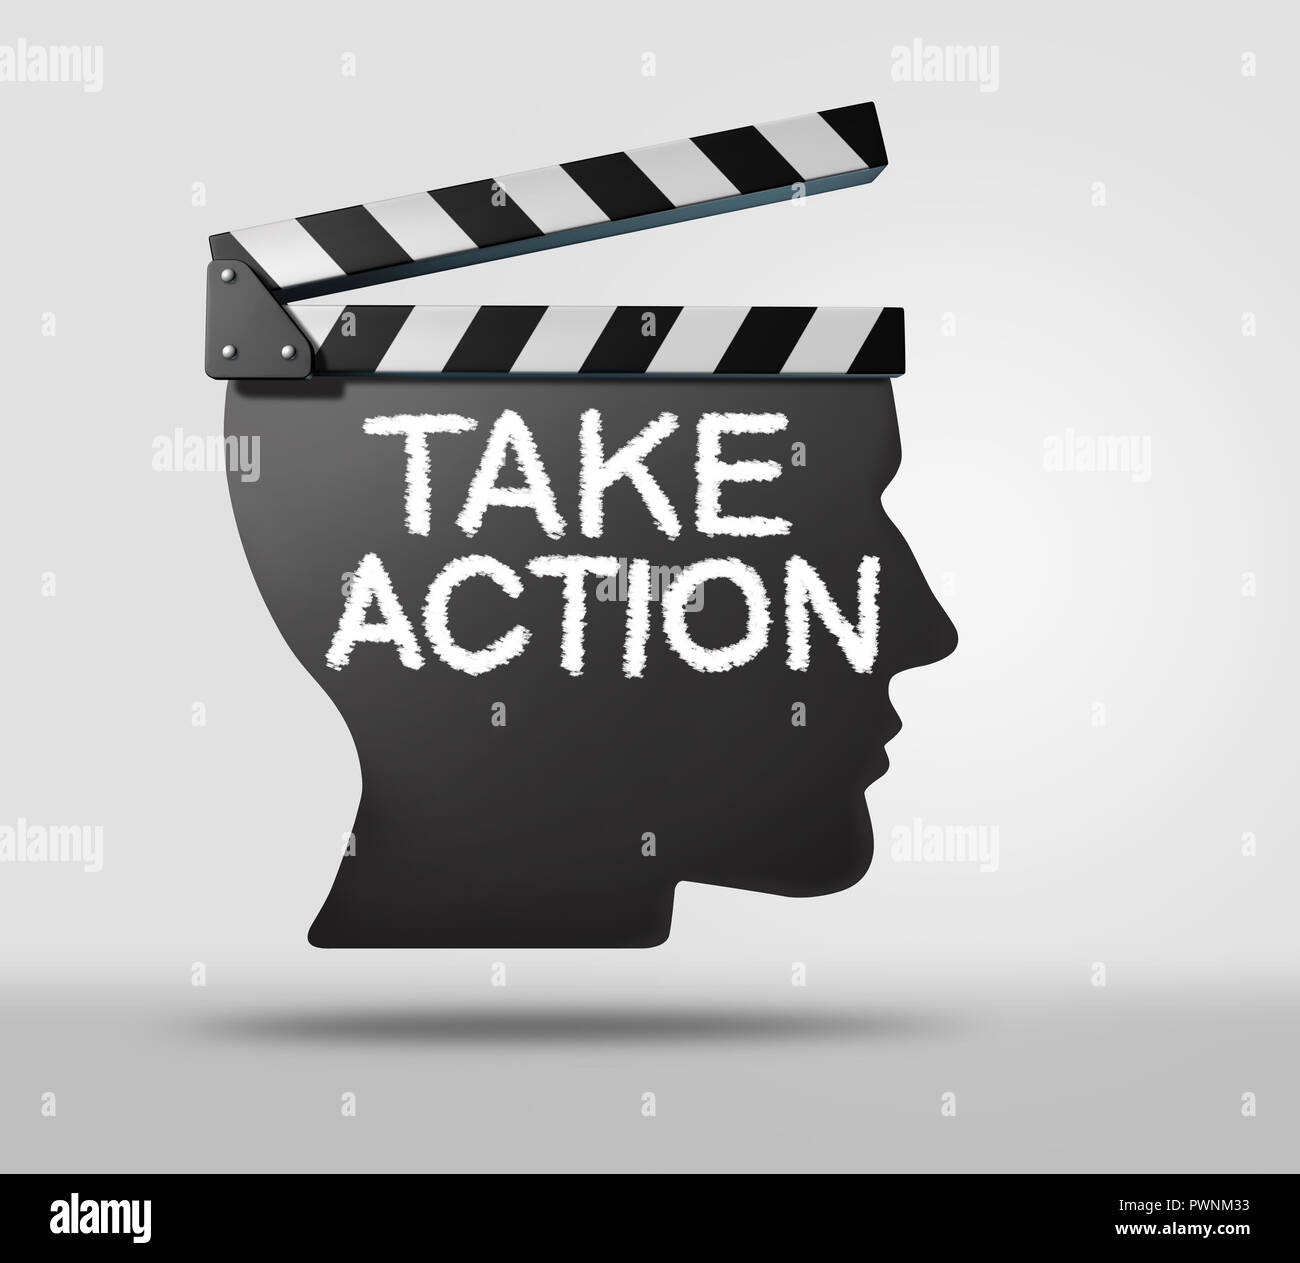 Take action business or life proactive concept as a symbol to dream big or set goals as a movie clapper shaped as a human. Stock Photo